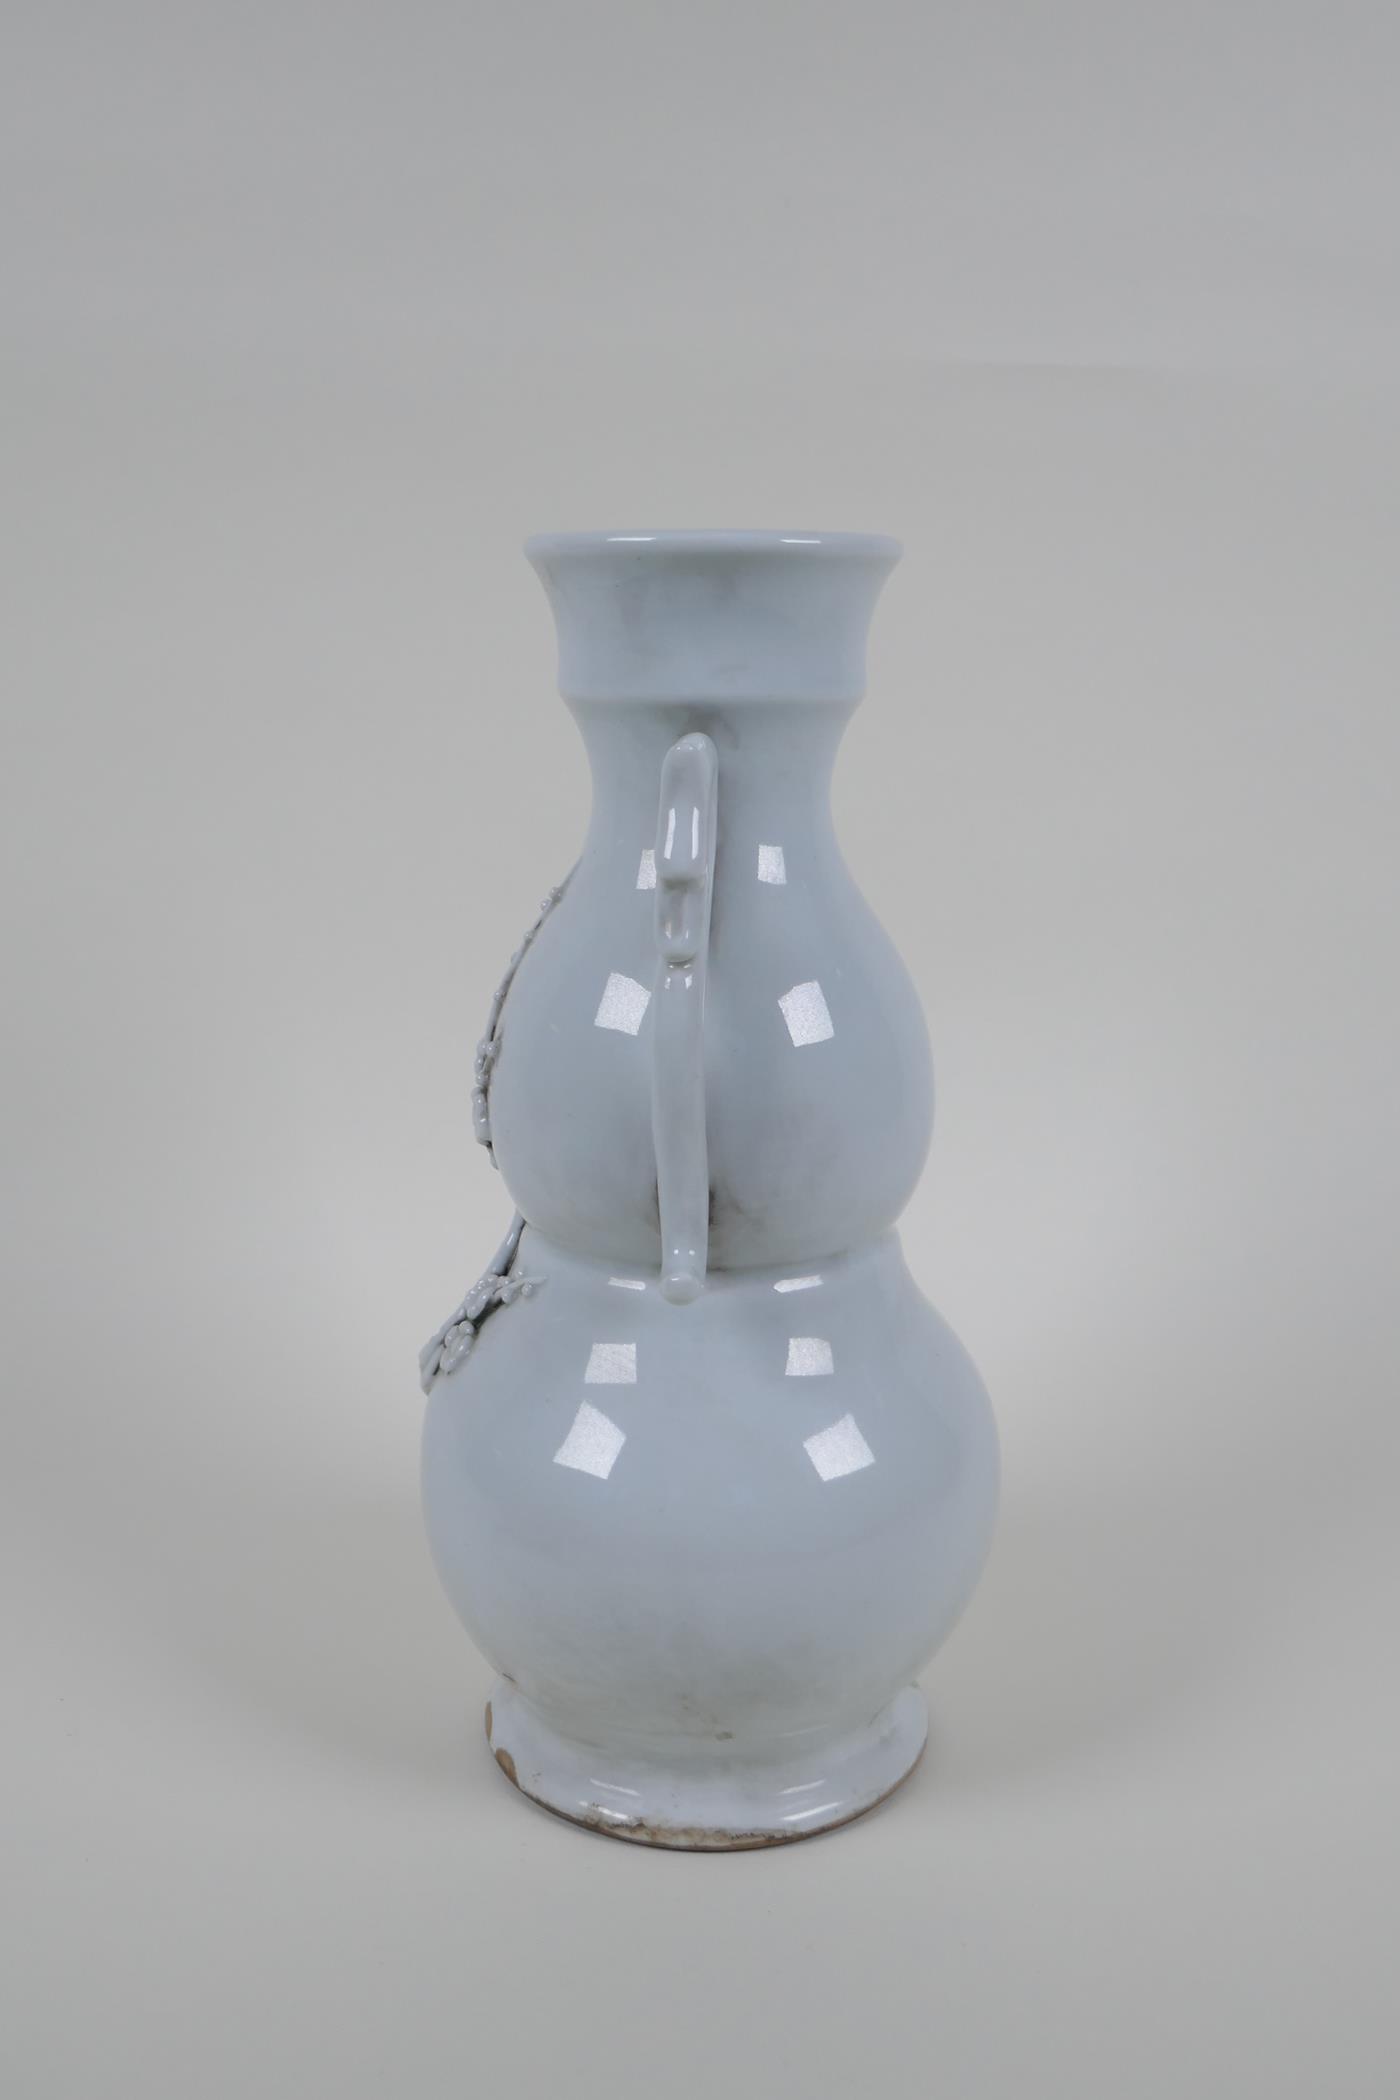 A blanc de chine porcelain two handled double gourd vase with raised prunus blossom decoration, - Image 2 of 5